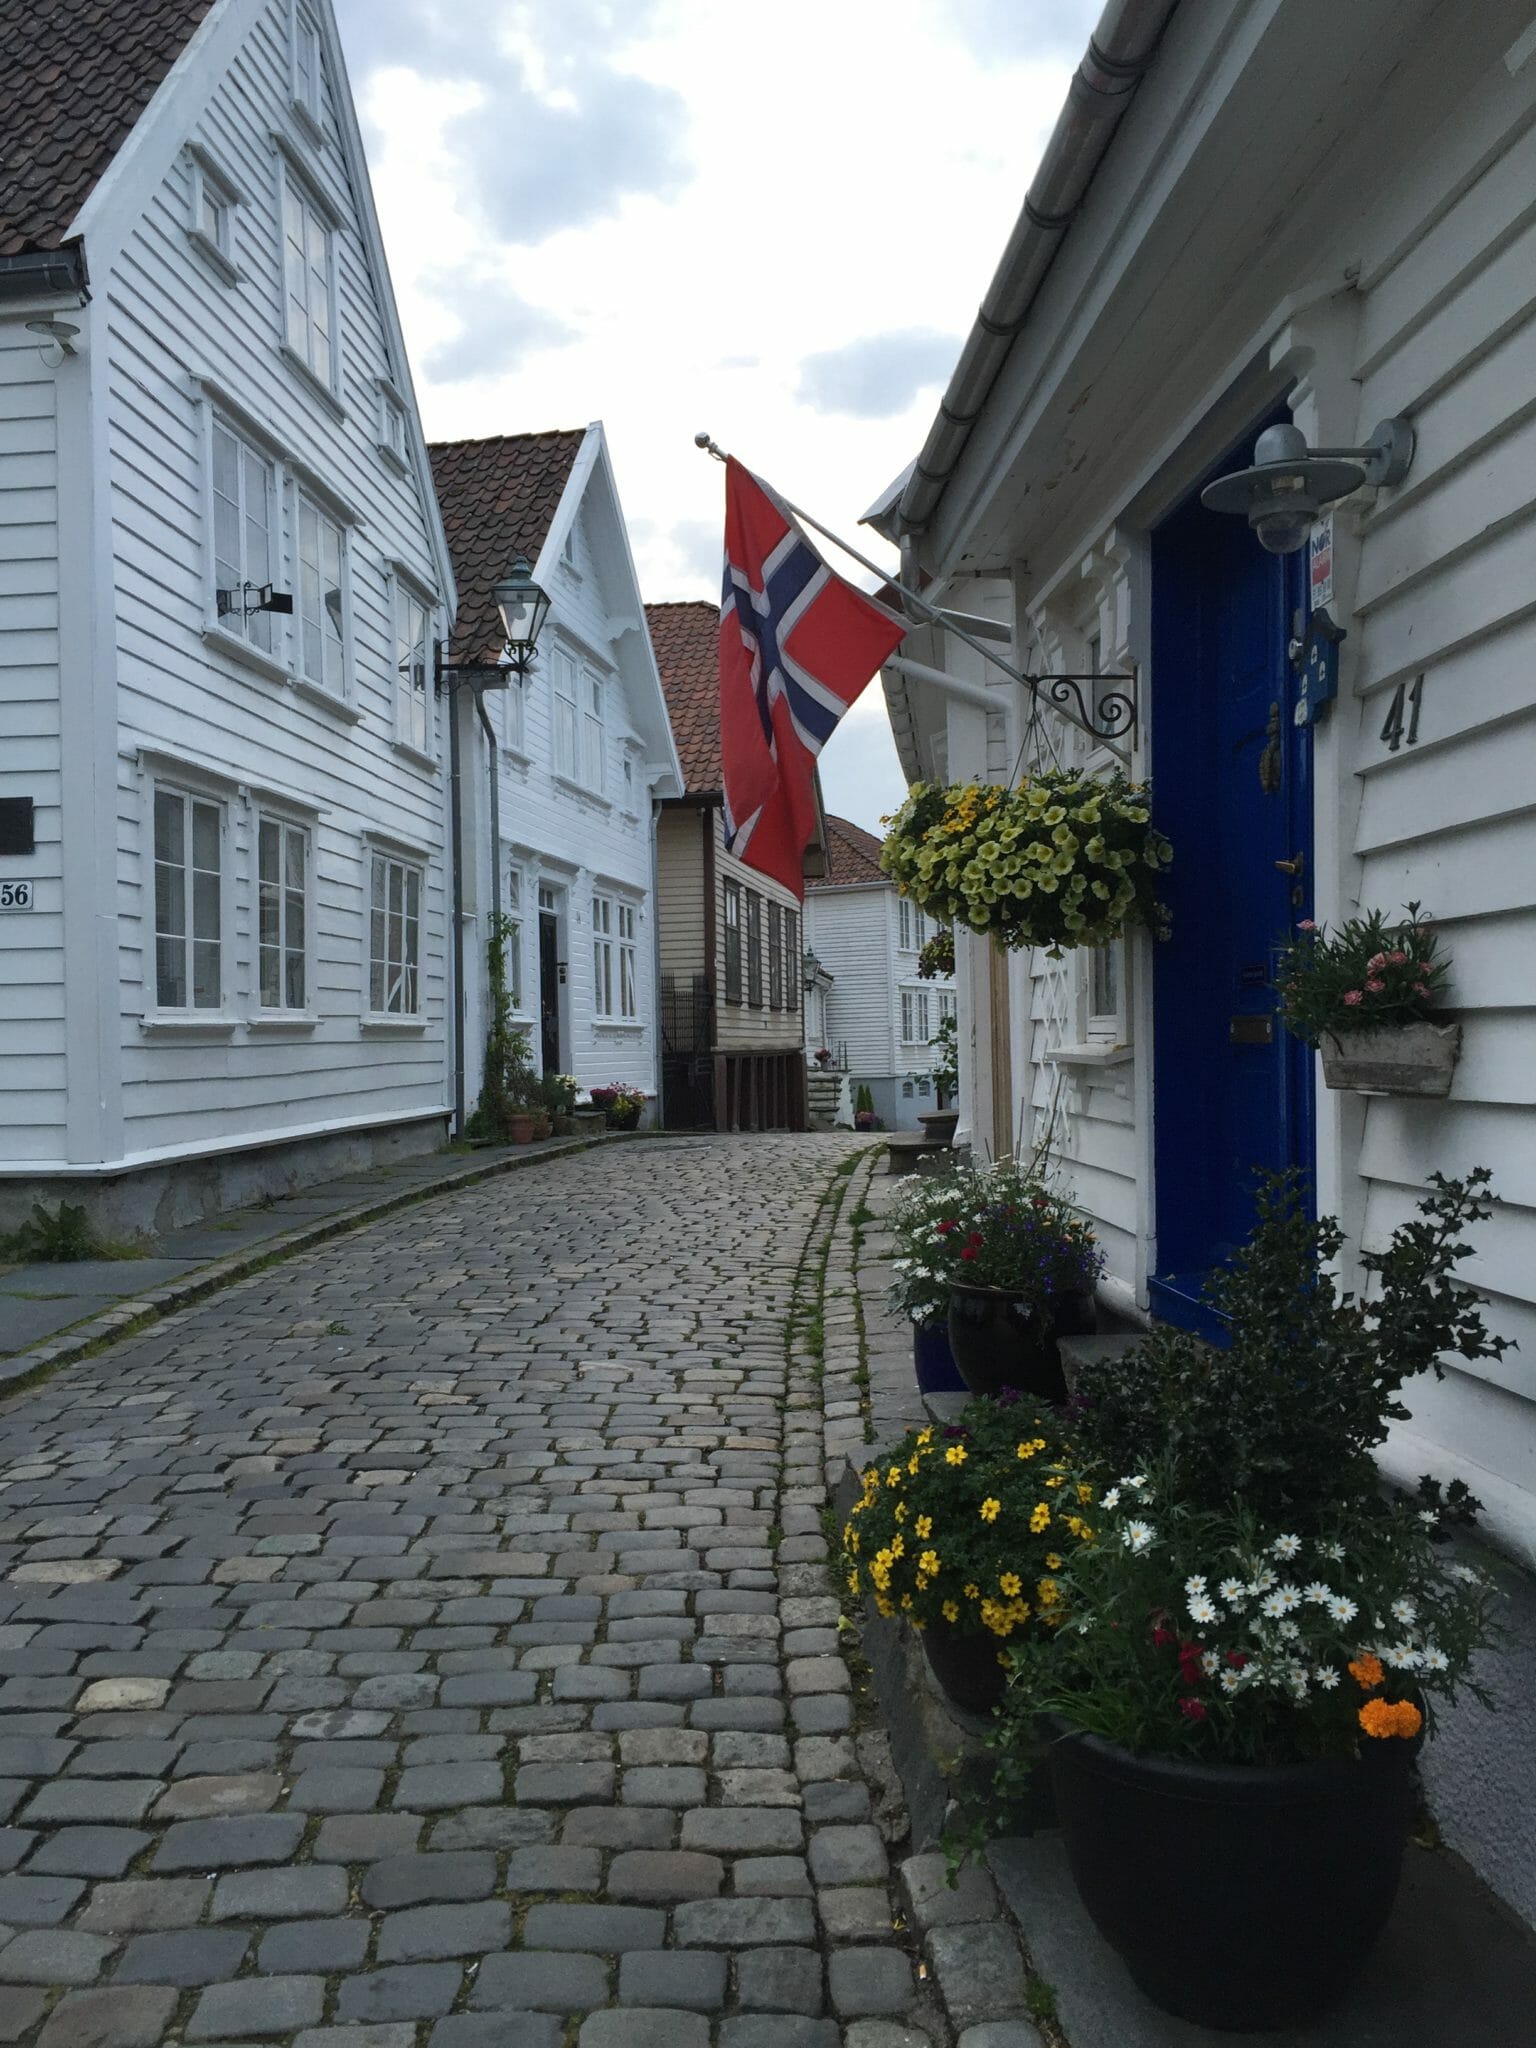 A cobblestone street with whitewashed houses some plants and a Norwegian flag in the city of Stavanger, Norway